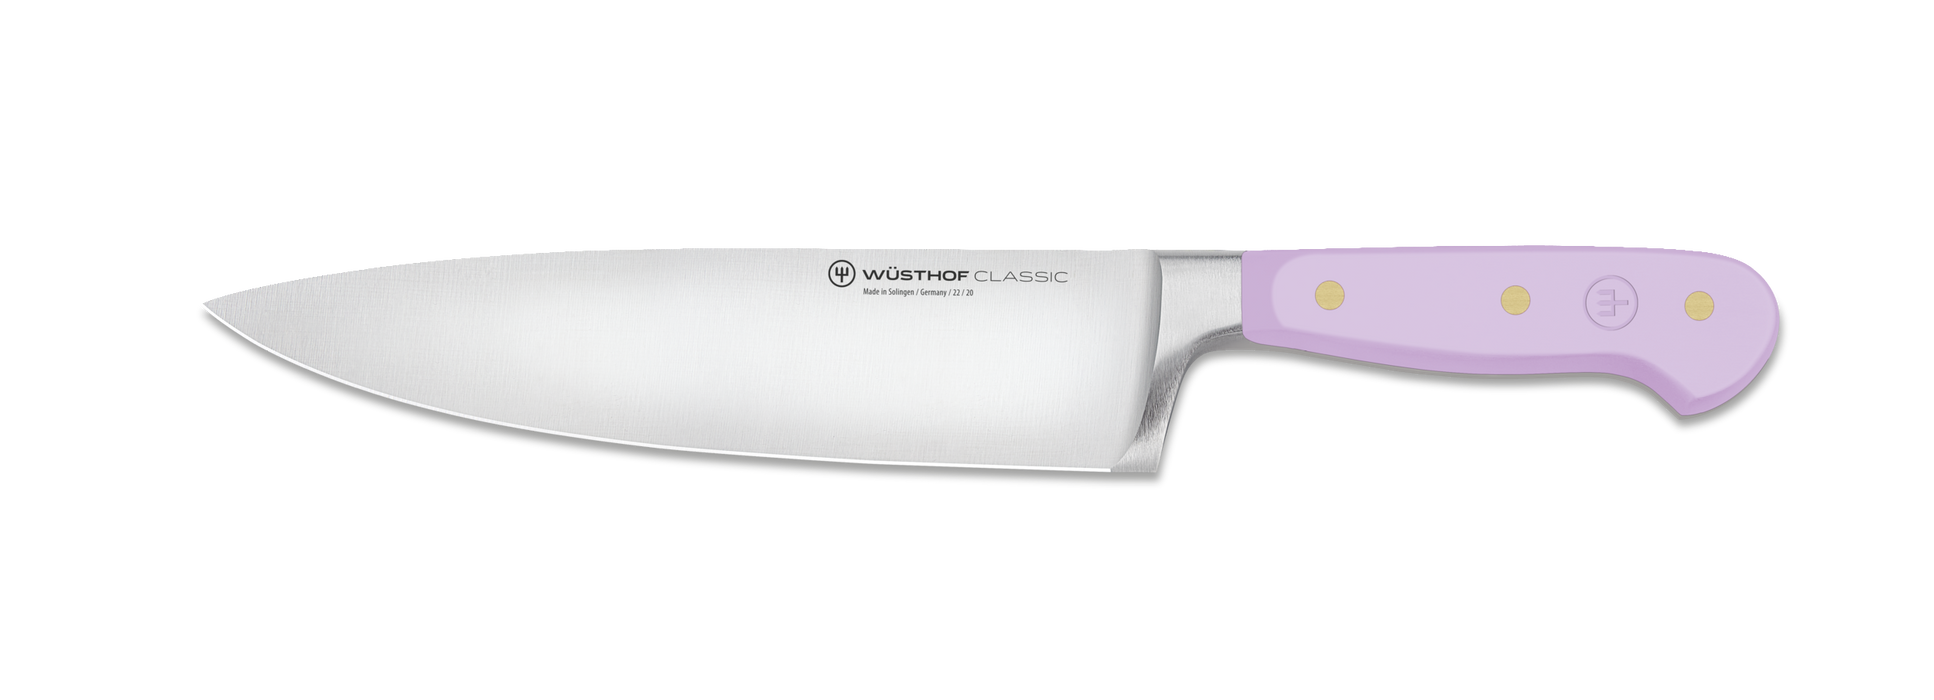 WUSTOF-TRIDENT OF AMERICA KNIFE CHEFS CLASSIC PURPLE YAM 8IN